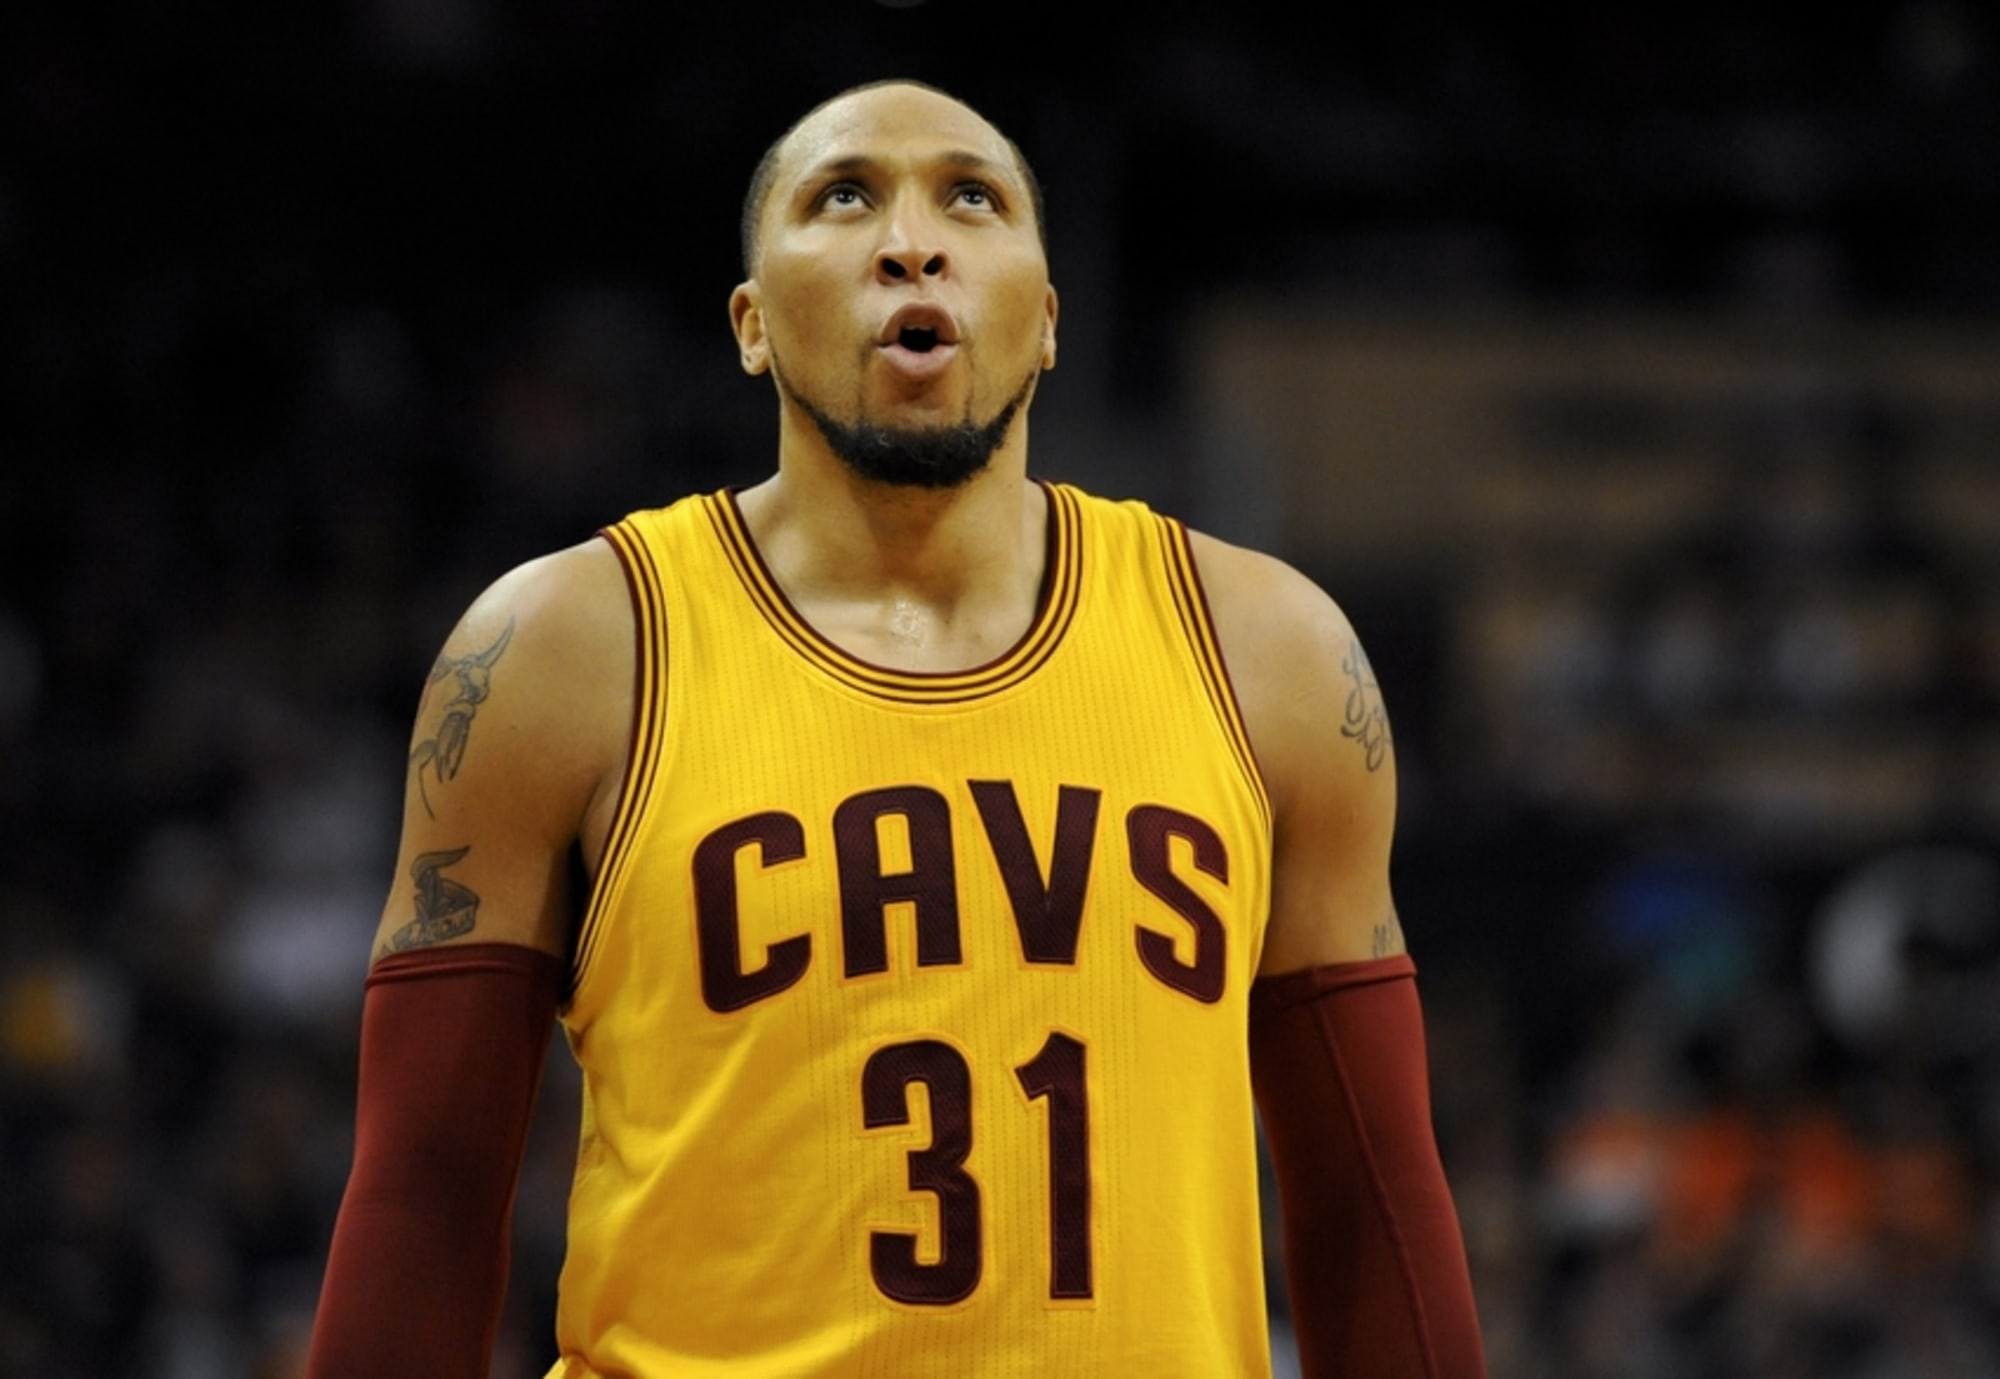 Snubbed: The Hall of Fame case for Shawn Marion - The Athletic